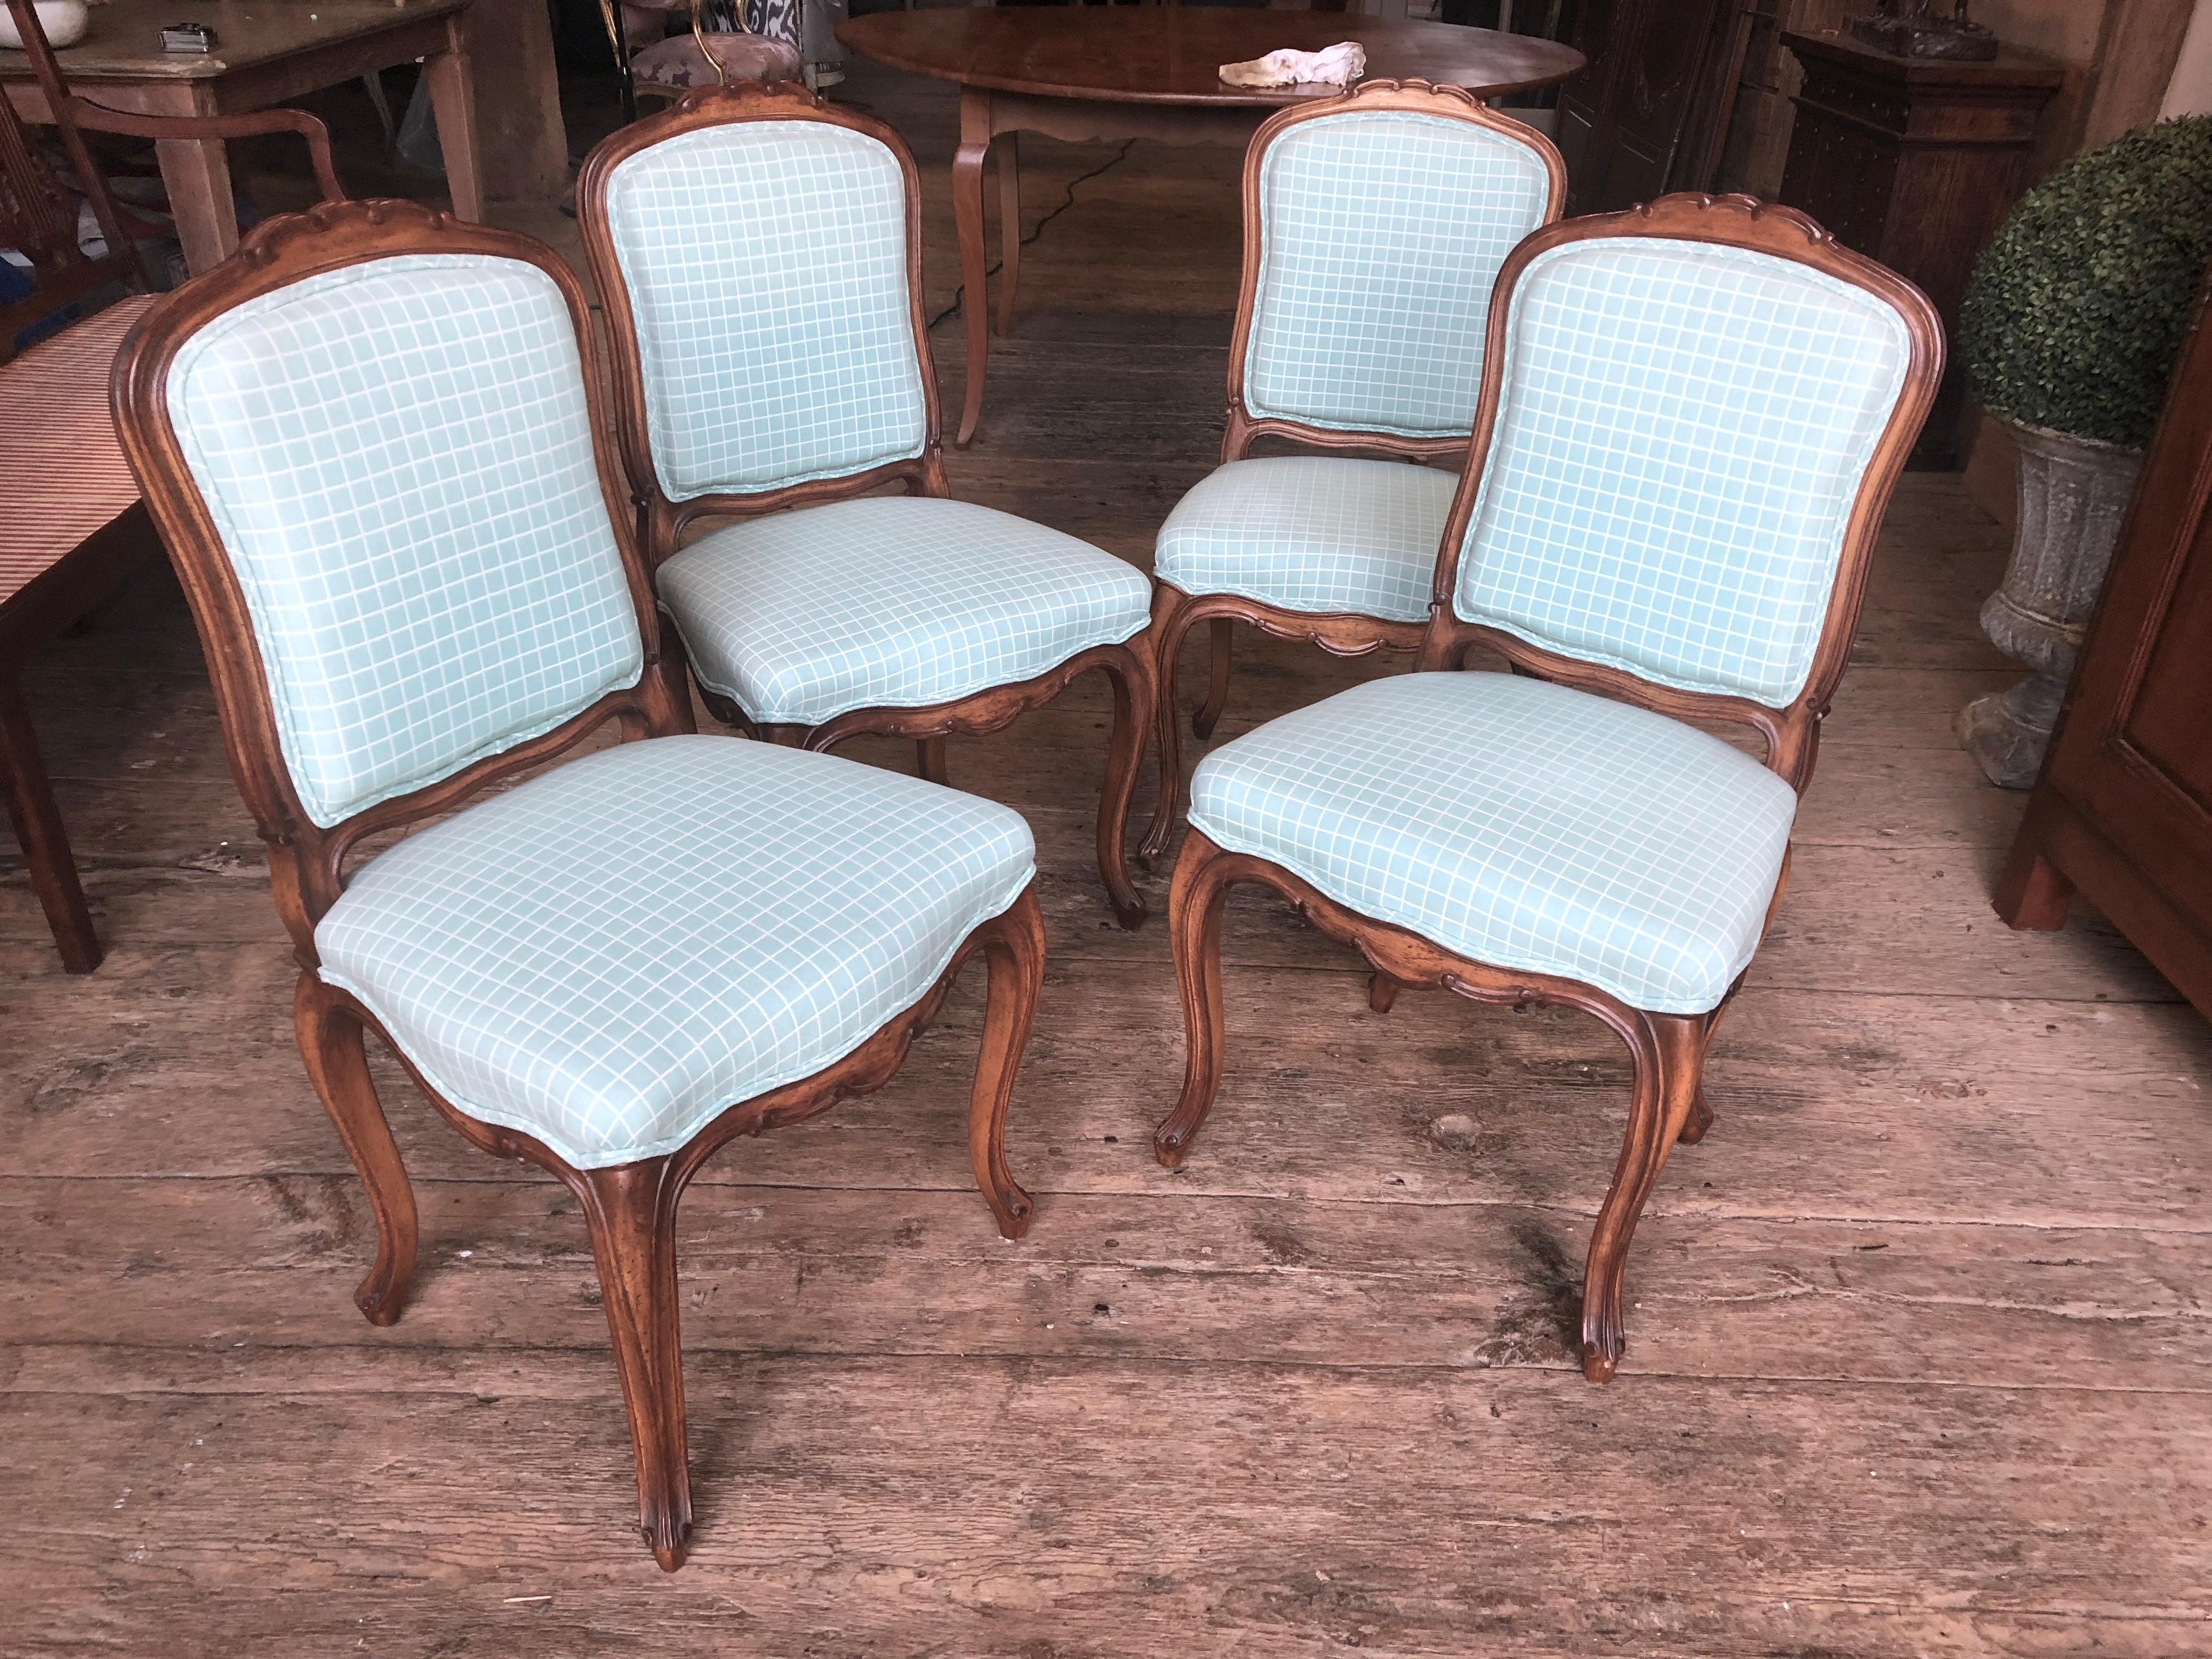 A nice set of four Louis XV style side chairs upholstered in blue and white check cotton fabric. The frames are good scale and nicely hand carved beech wood. Stained a medium cherry. Scalloped aprons and cabriole legs. These are high quality